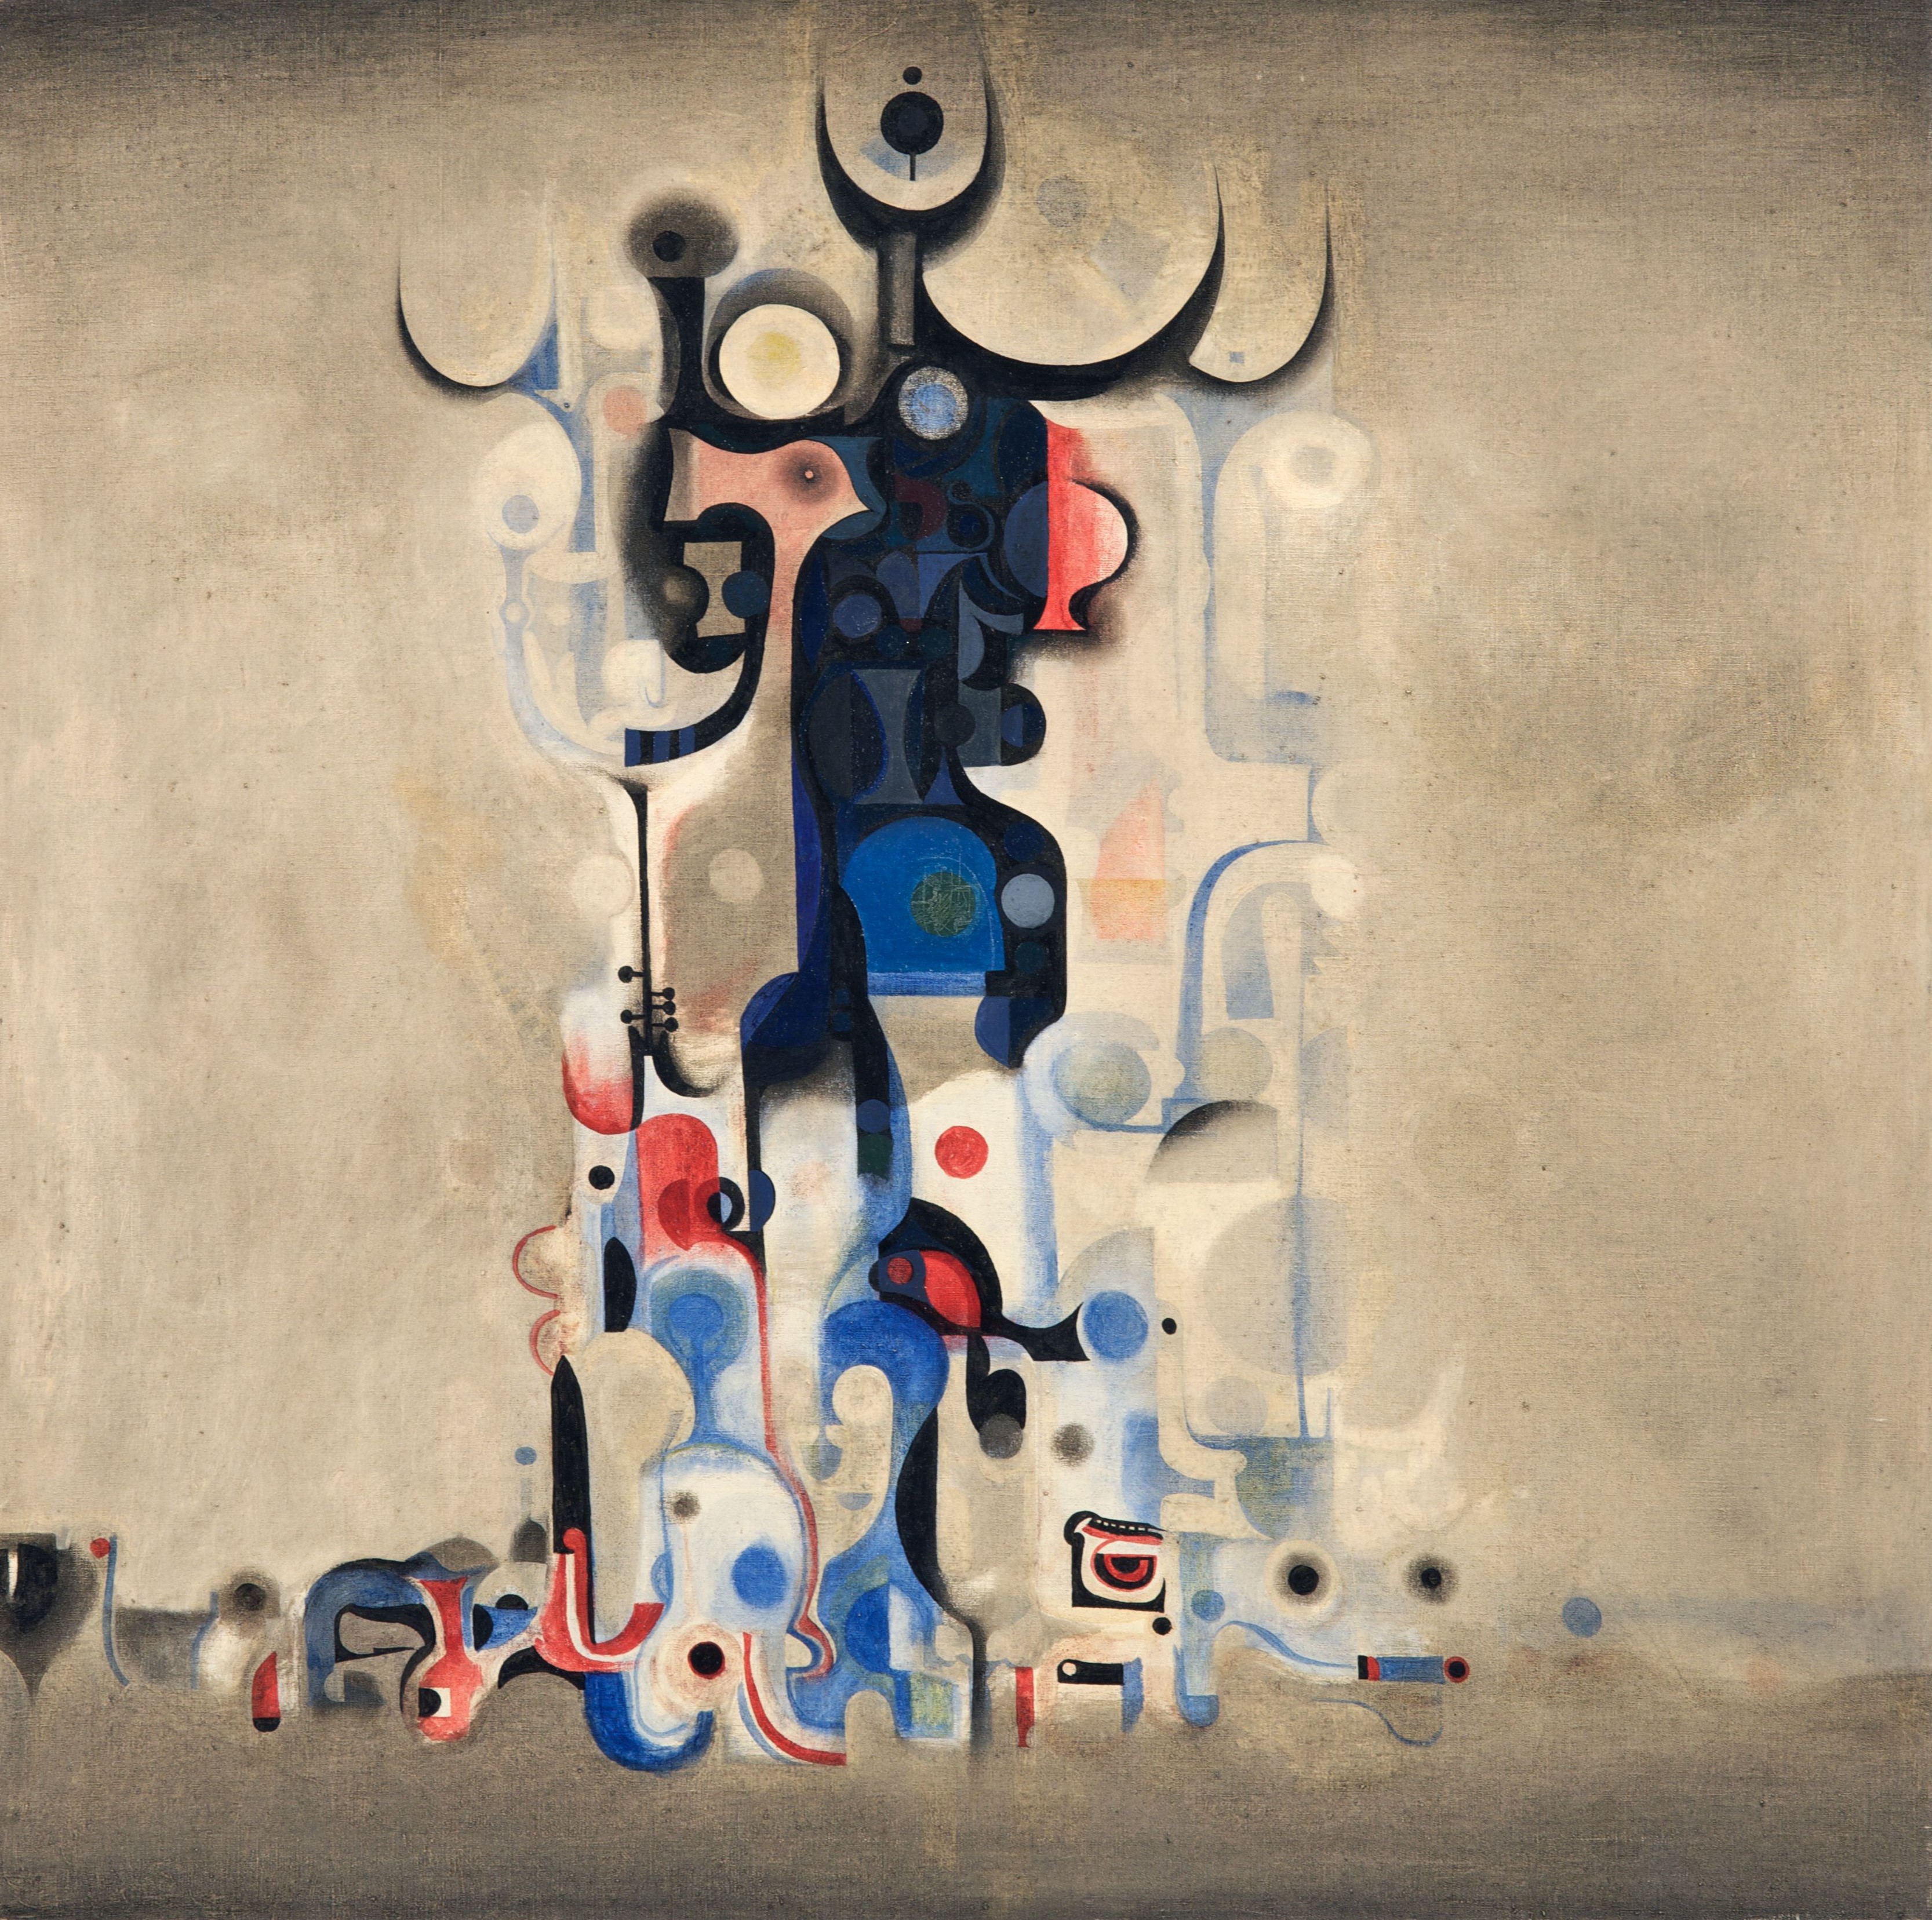 Ibrahim El-Salahi (born 1930, Sudan) Vision of the Tomb, 1965 Oil on canvas 36 x 36 in. Collection of The Africa Center, New York, 2008.2.1 Photograph by Jerry L. Thompson © Ibrahim El-Salahi All rights reserved, ARS, NY 2022 Courtesy Vigo Gallery and American Federation of Arts